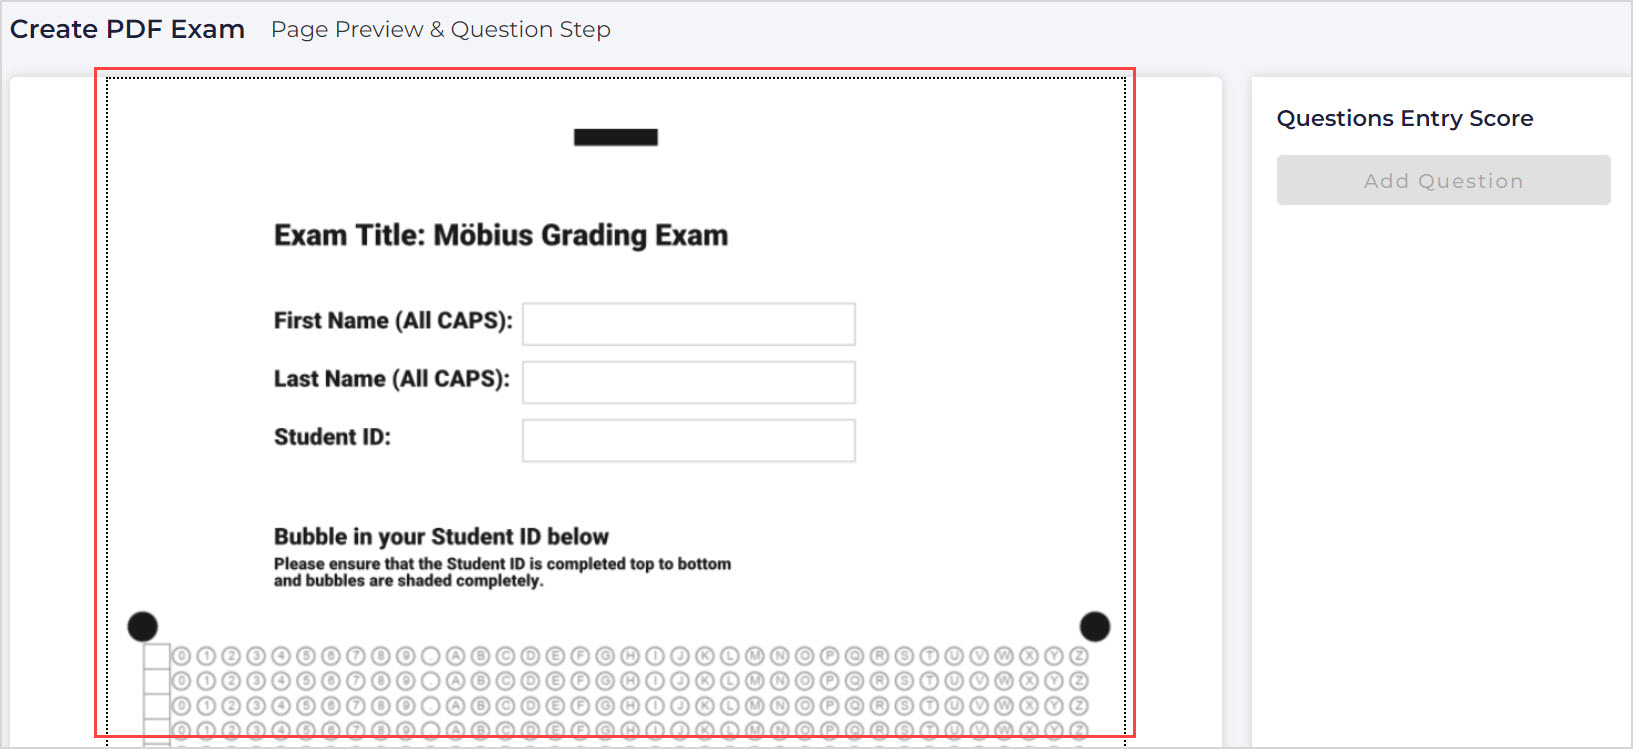 The Create PDF Exam - Page Preview & Question Setup screen is shown with the exam pdf preview highlighted.